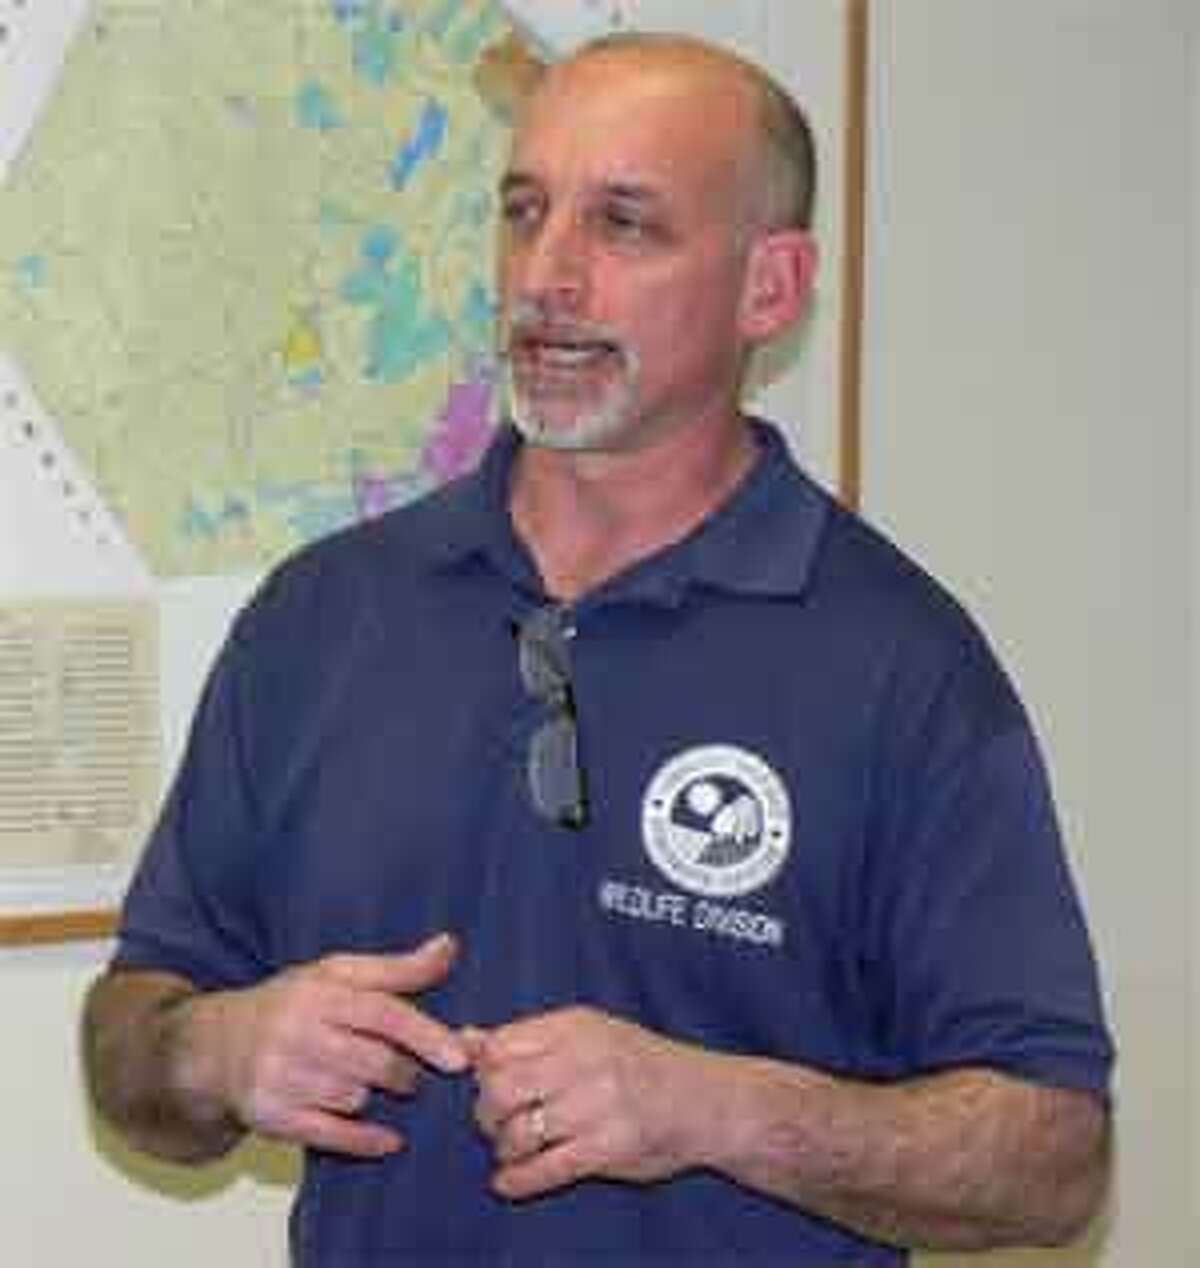 Howard Kilpatrick, a wildlife biologist for the state, discusses how to control the deer population at a Shelton Deer Committee meeting.